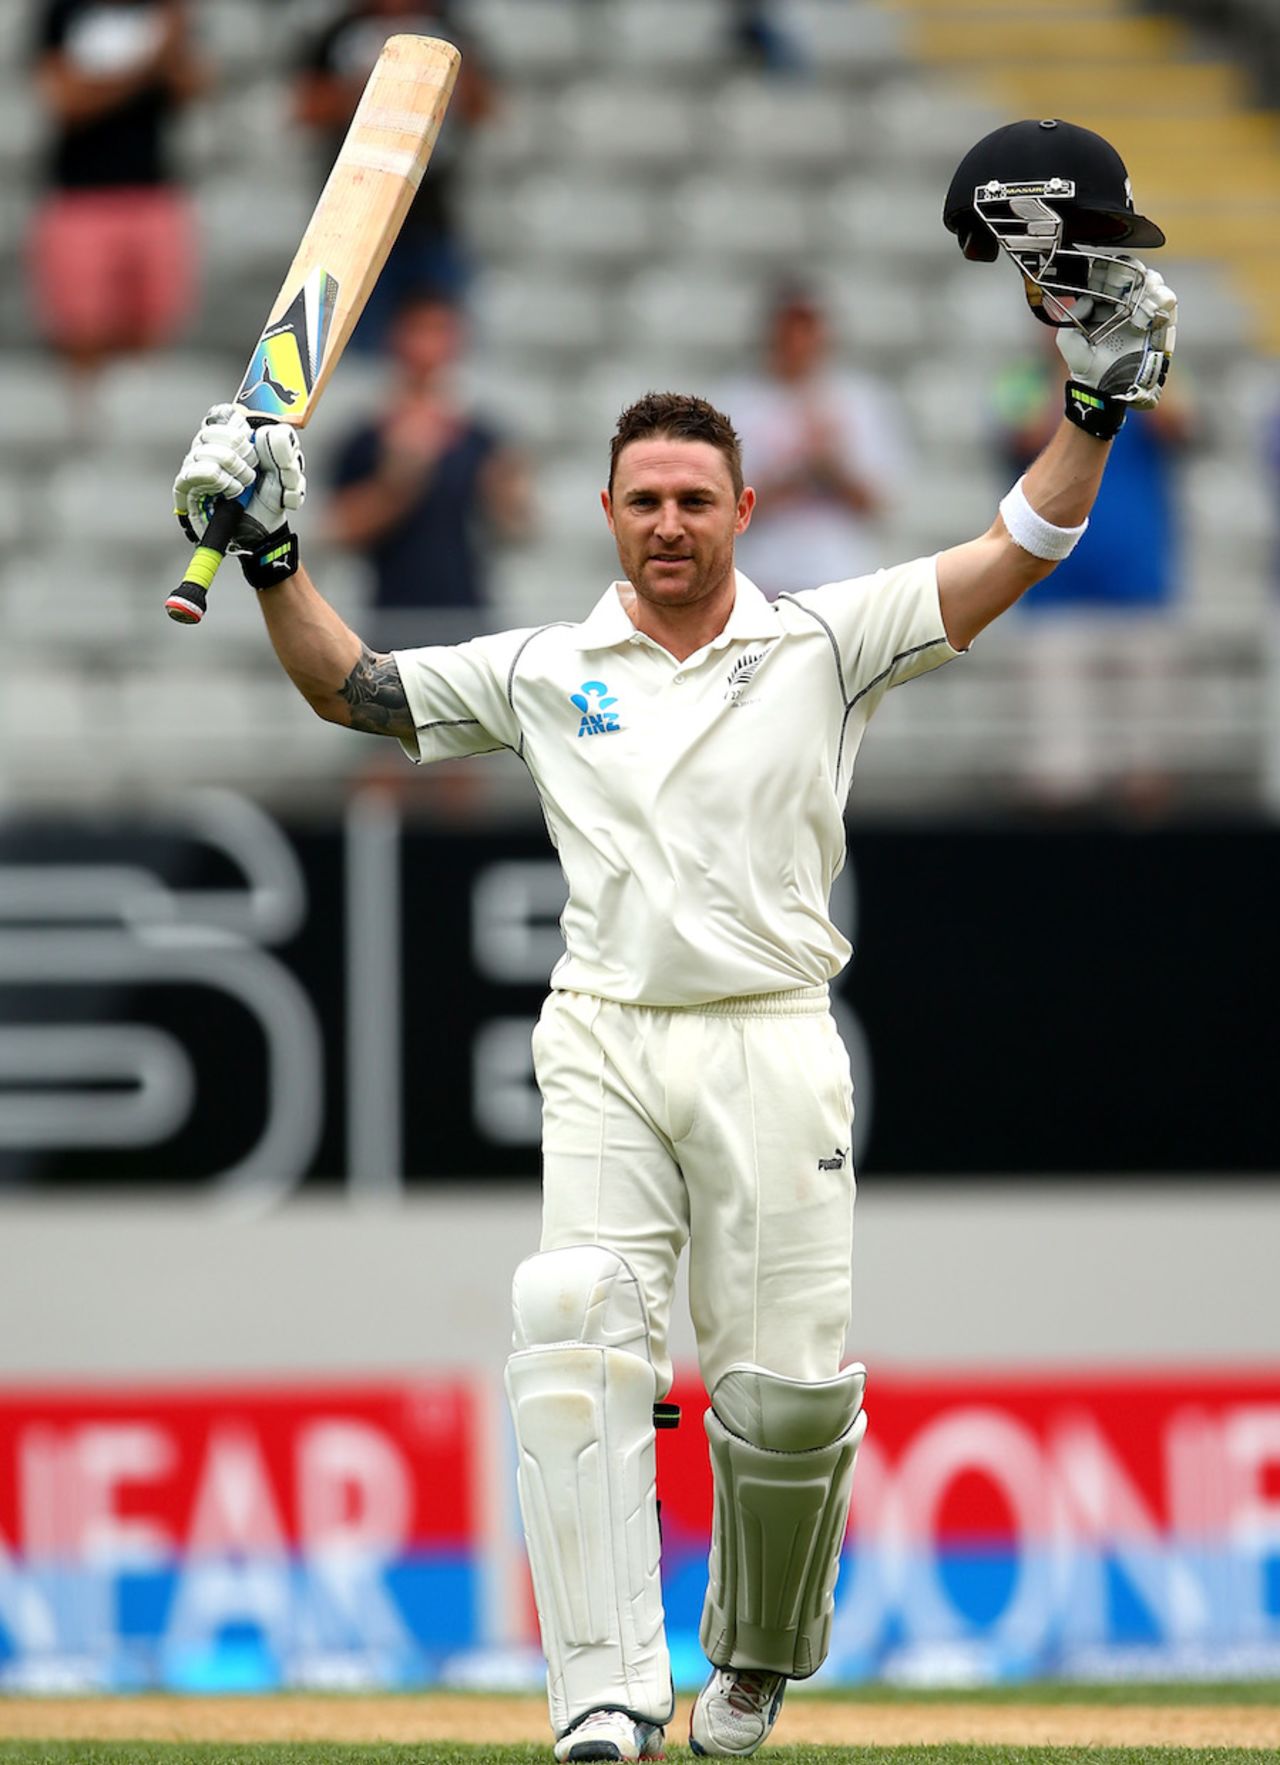 Brendon McCullum reached his second double-century at the stroke of lunch, New Zealand v India, 1st Test, Auckland, 2nd day, February 7, 2014